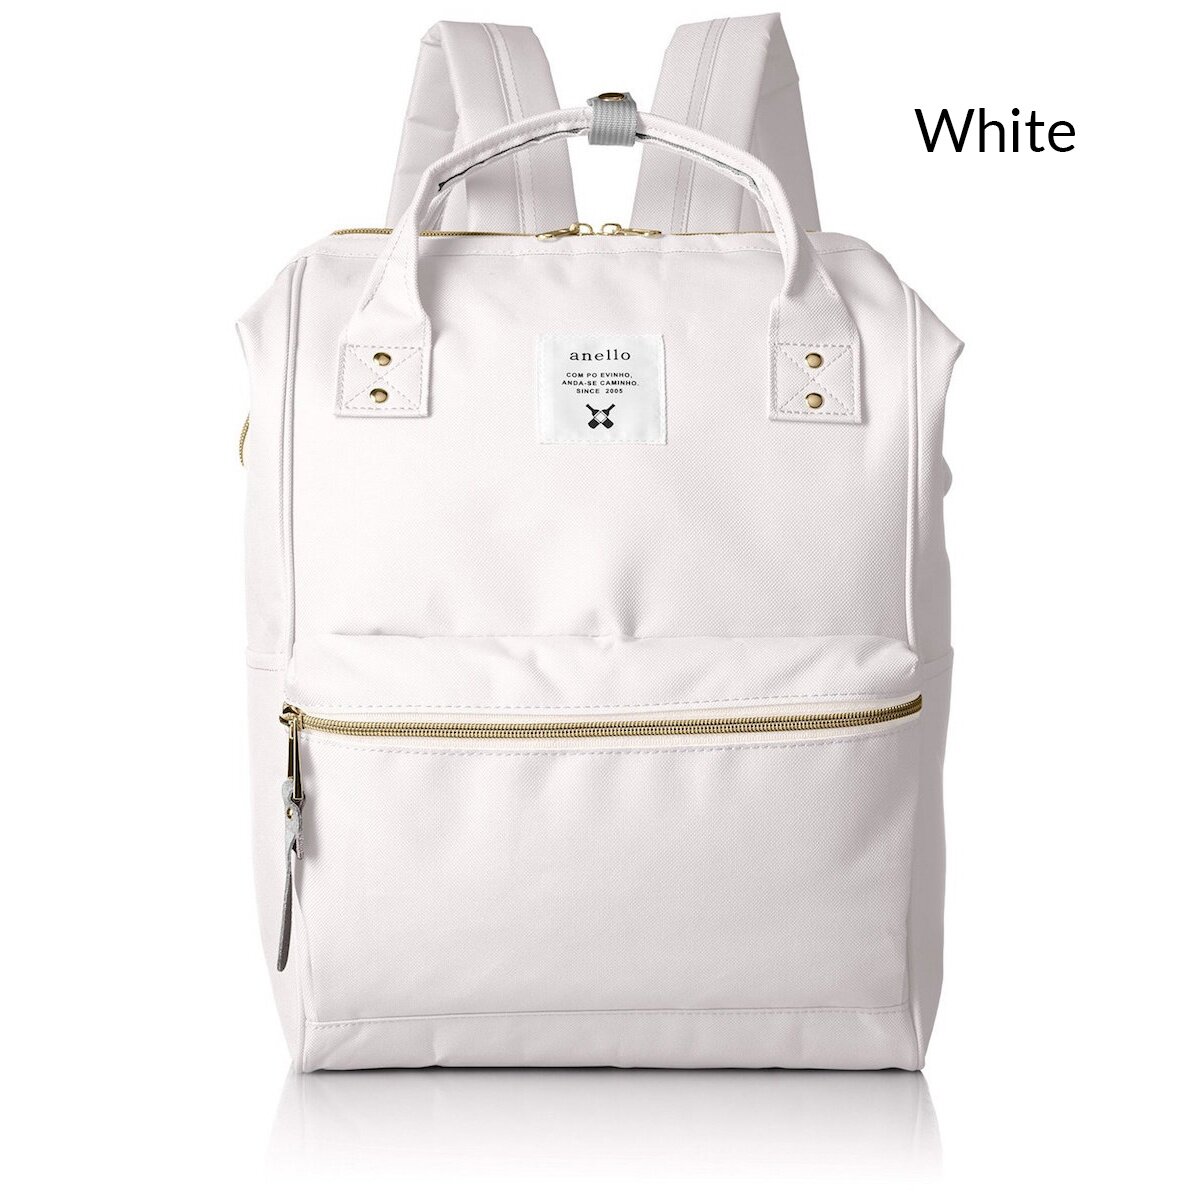  anello(アネロ) Men's Regular Size Metal Backpack, Tricolor:  Clothing, Shoes & Jewelry